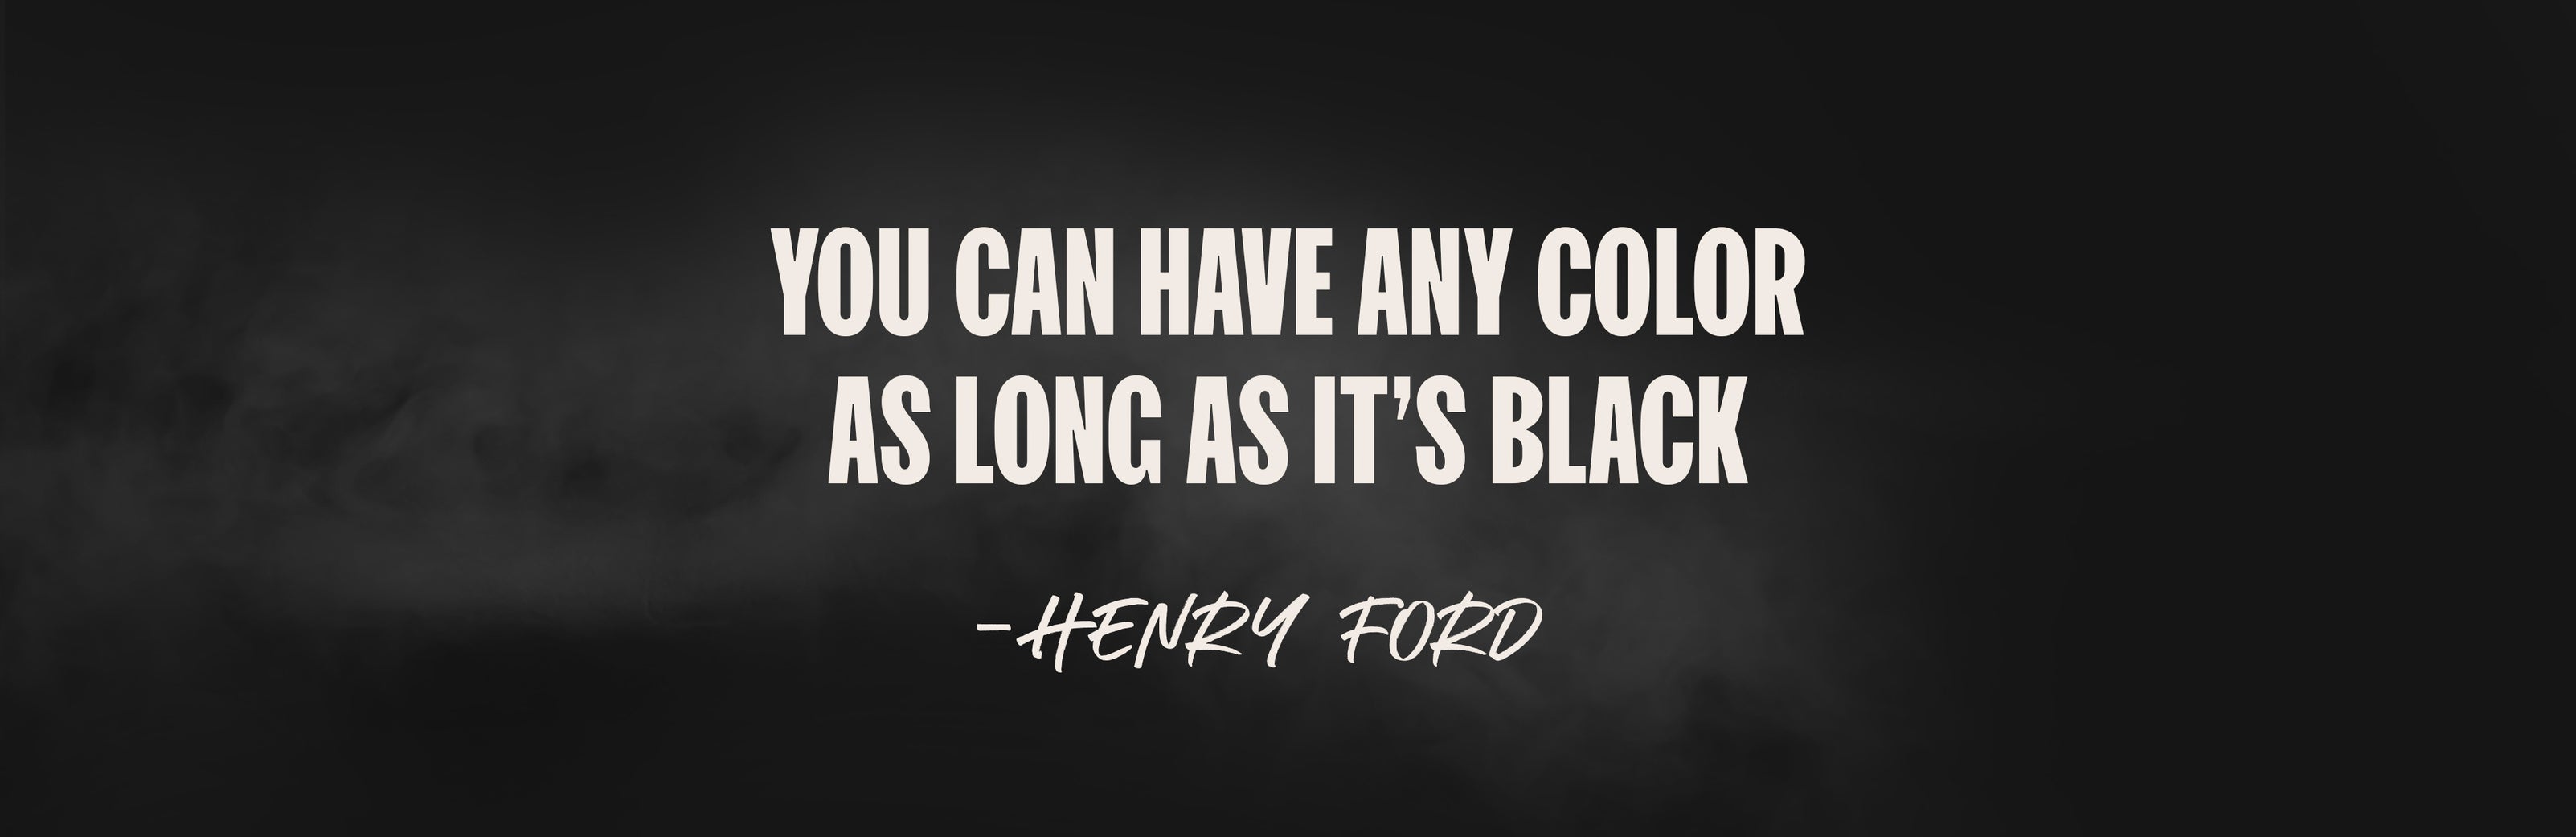 You can have any color as long as it's black - Henry Ford quote